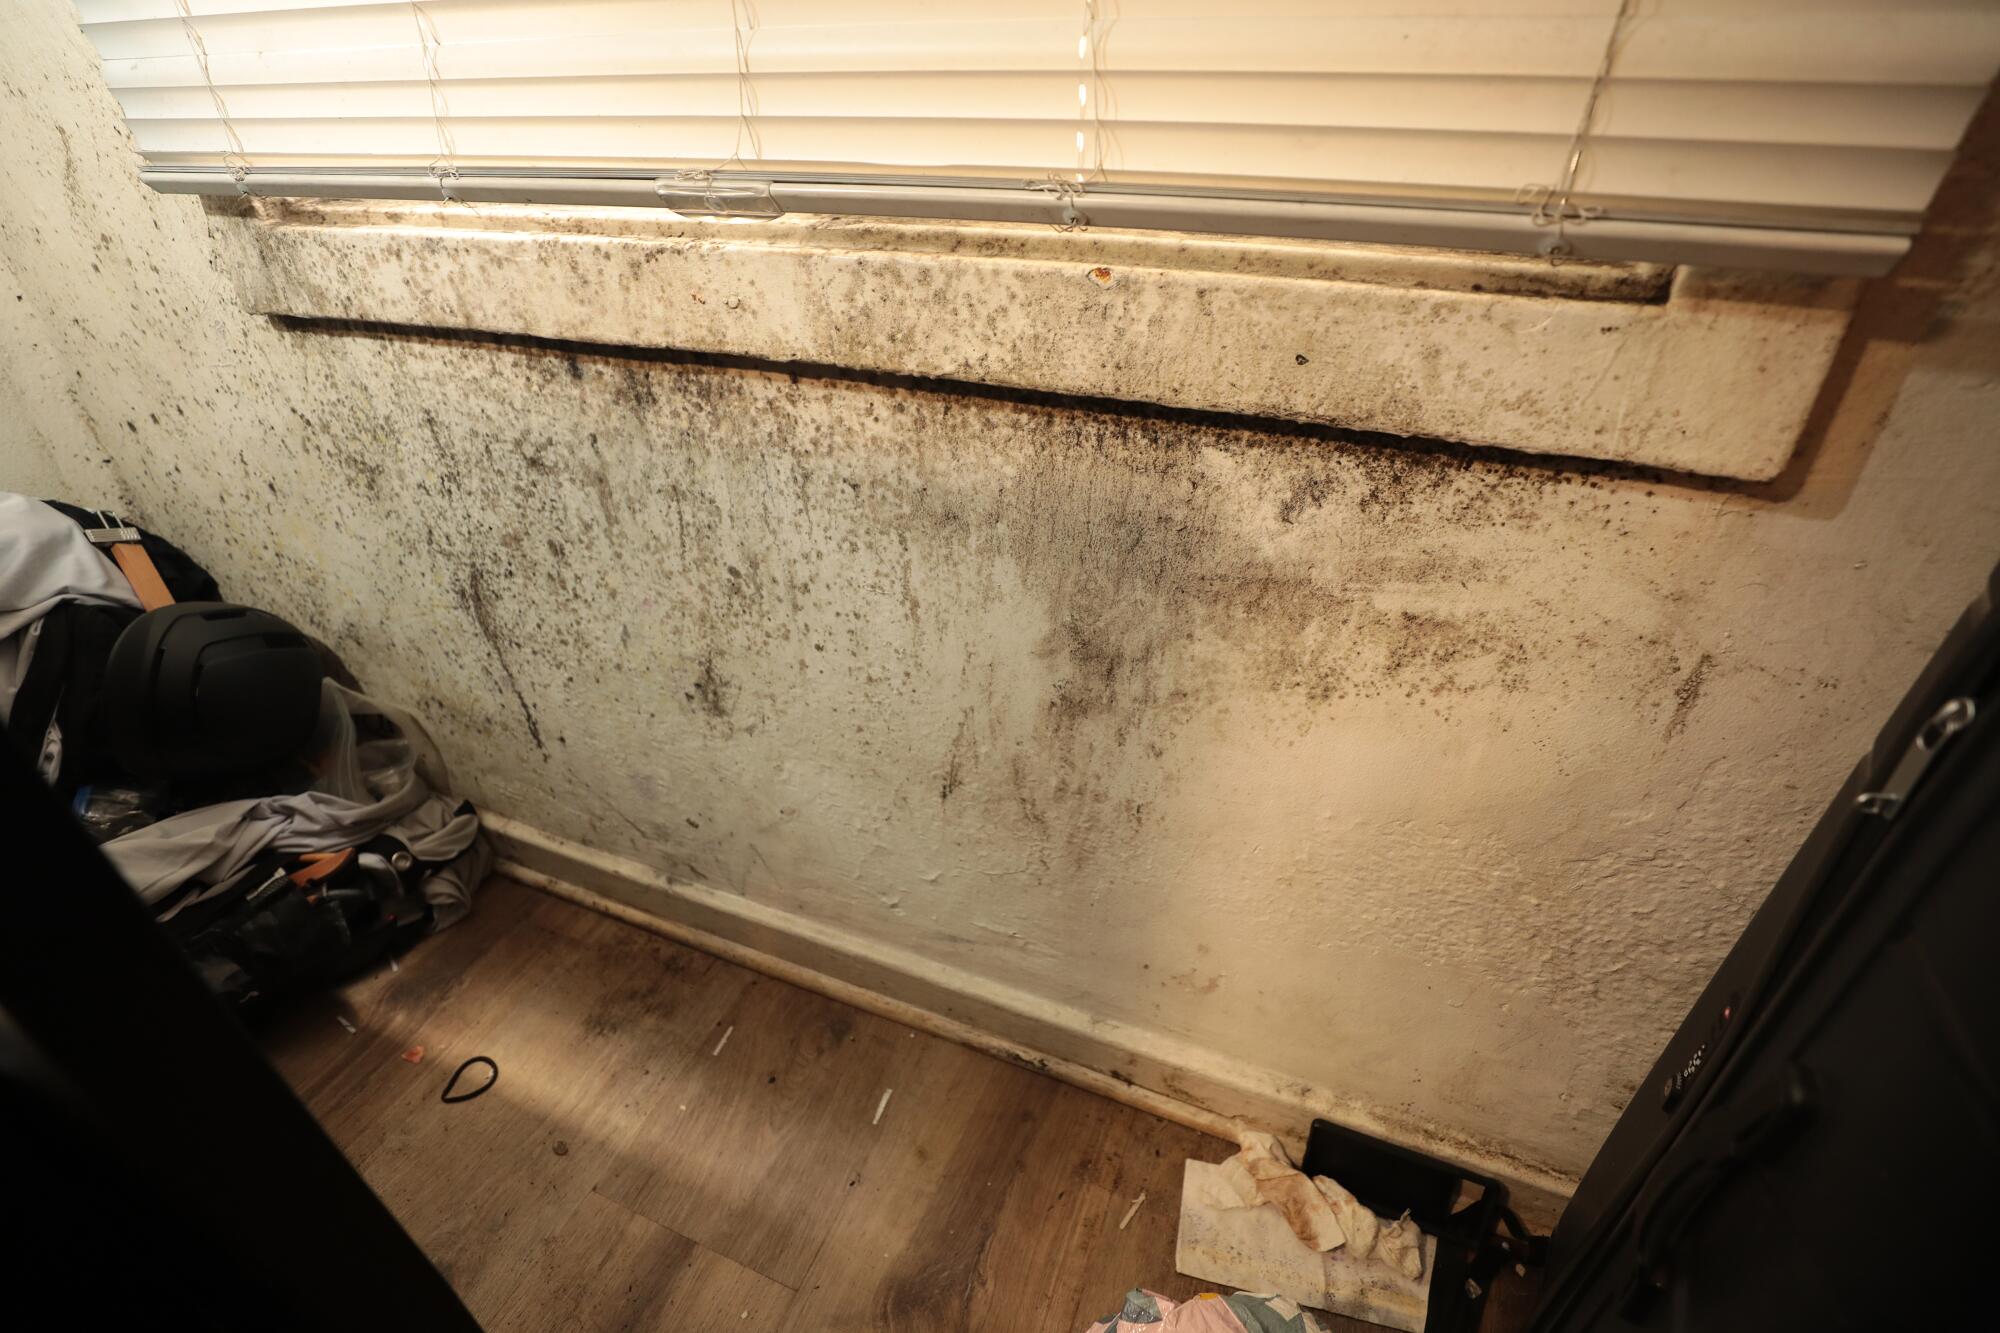 Mold on a wall under a window